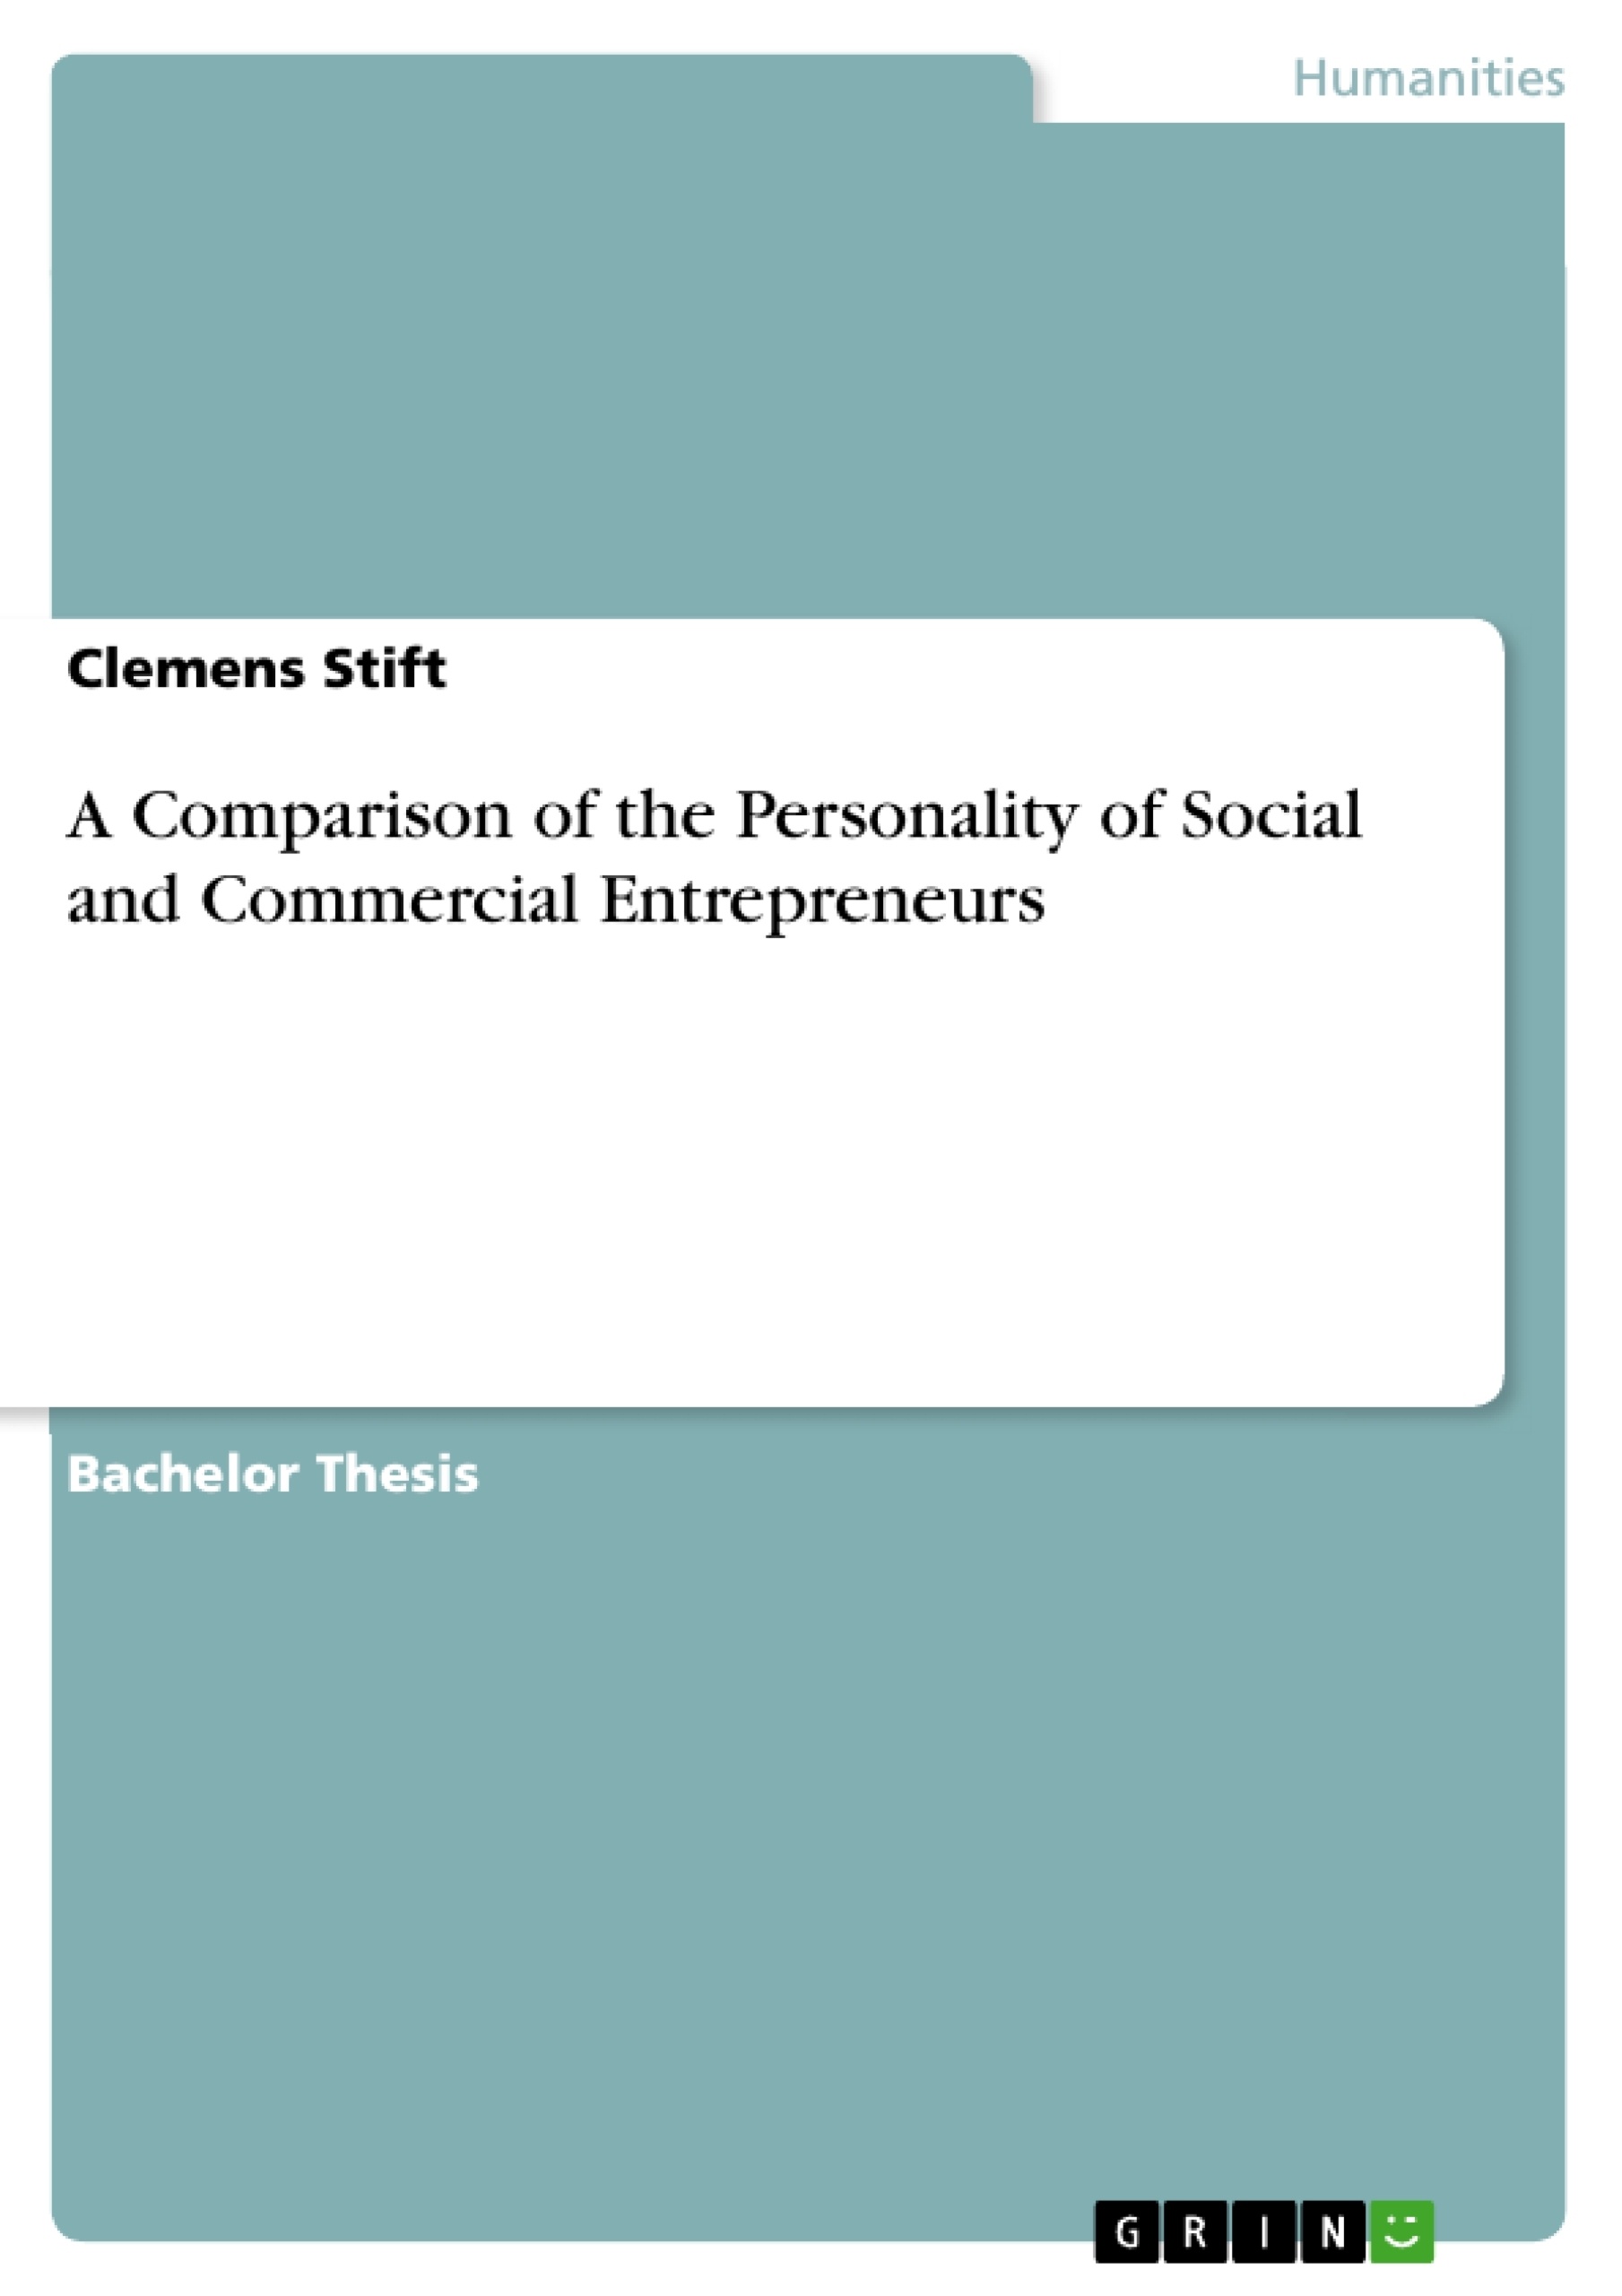 Title: A Comparison of the Personality of Social and Commercial Entrepreneurs